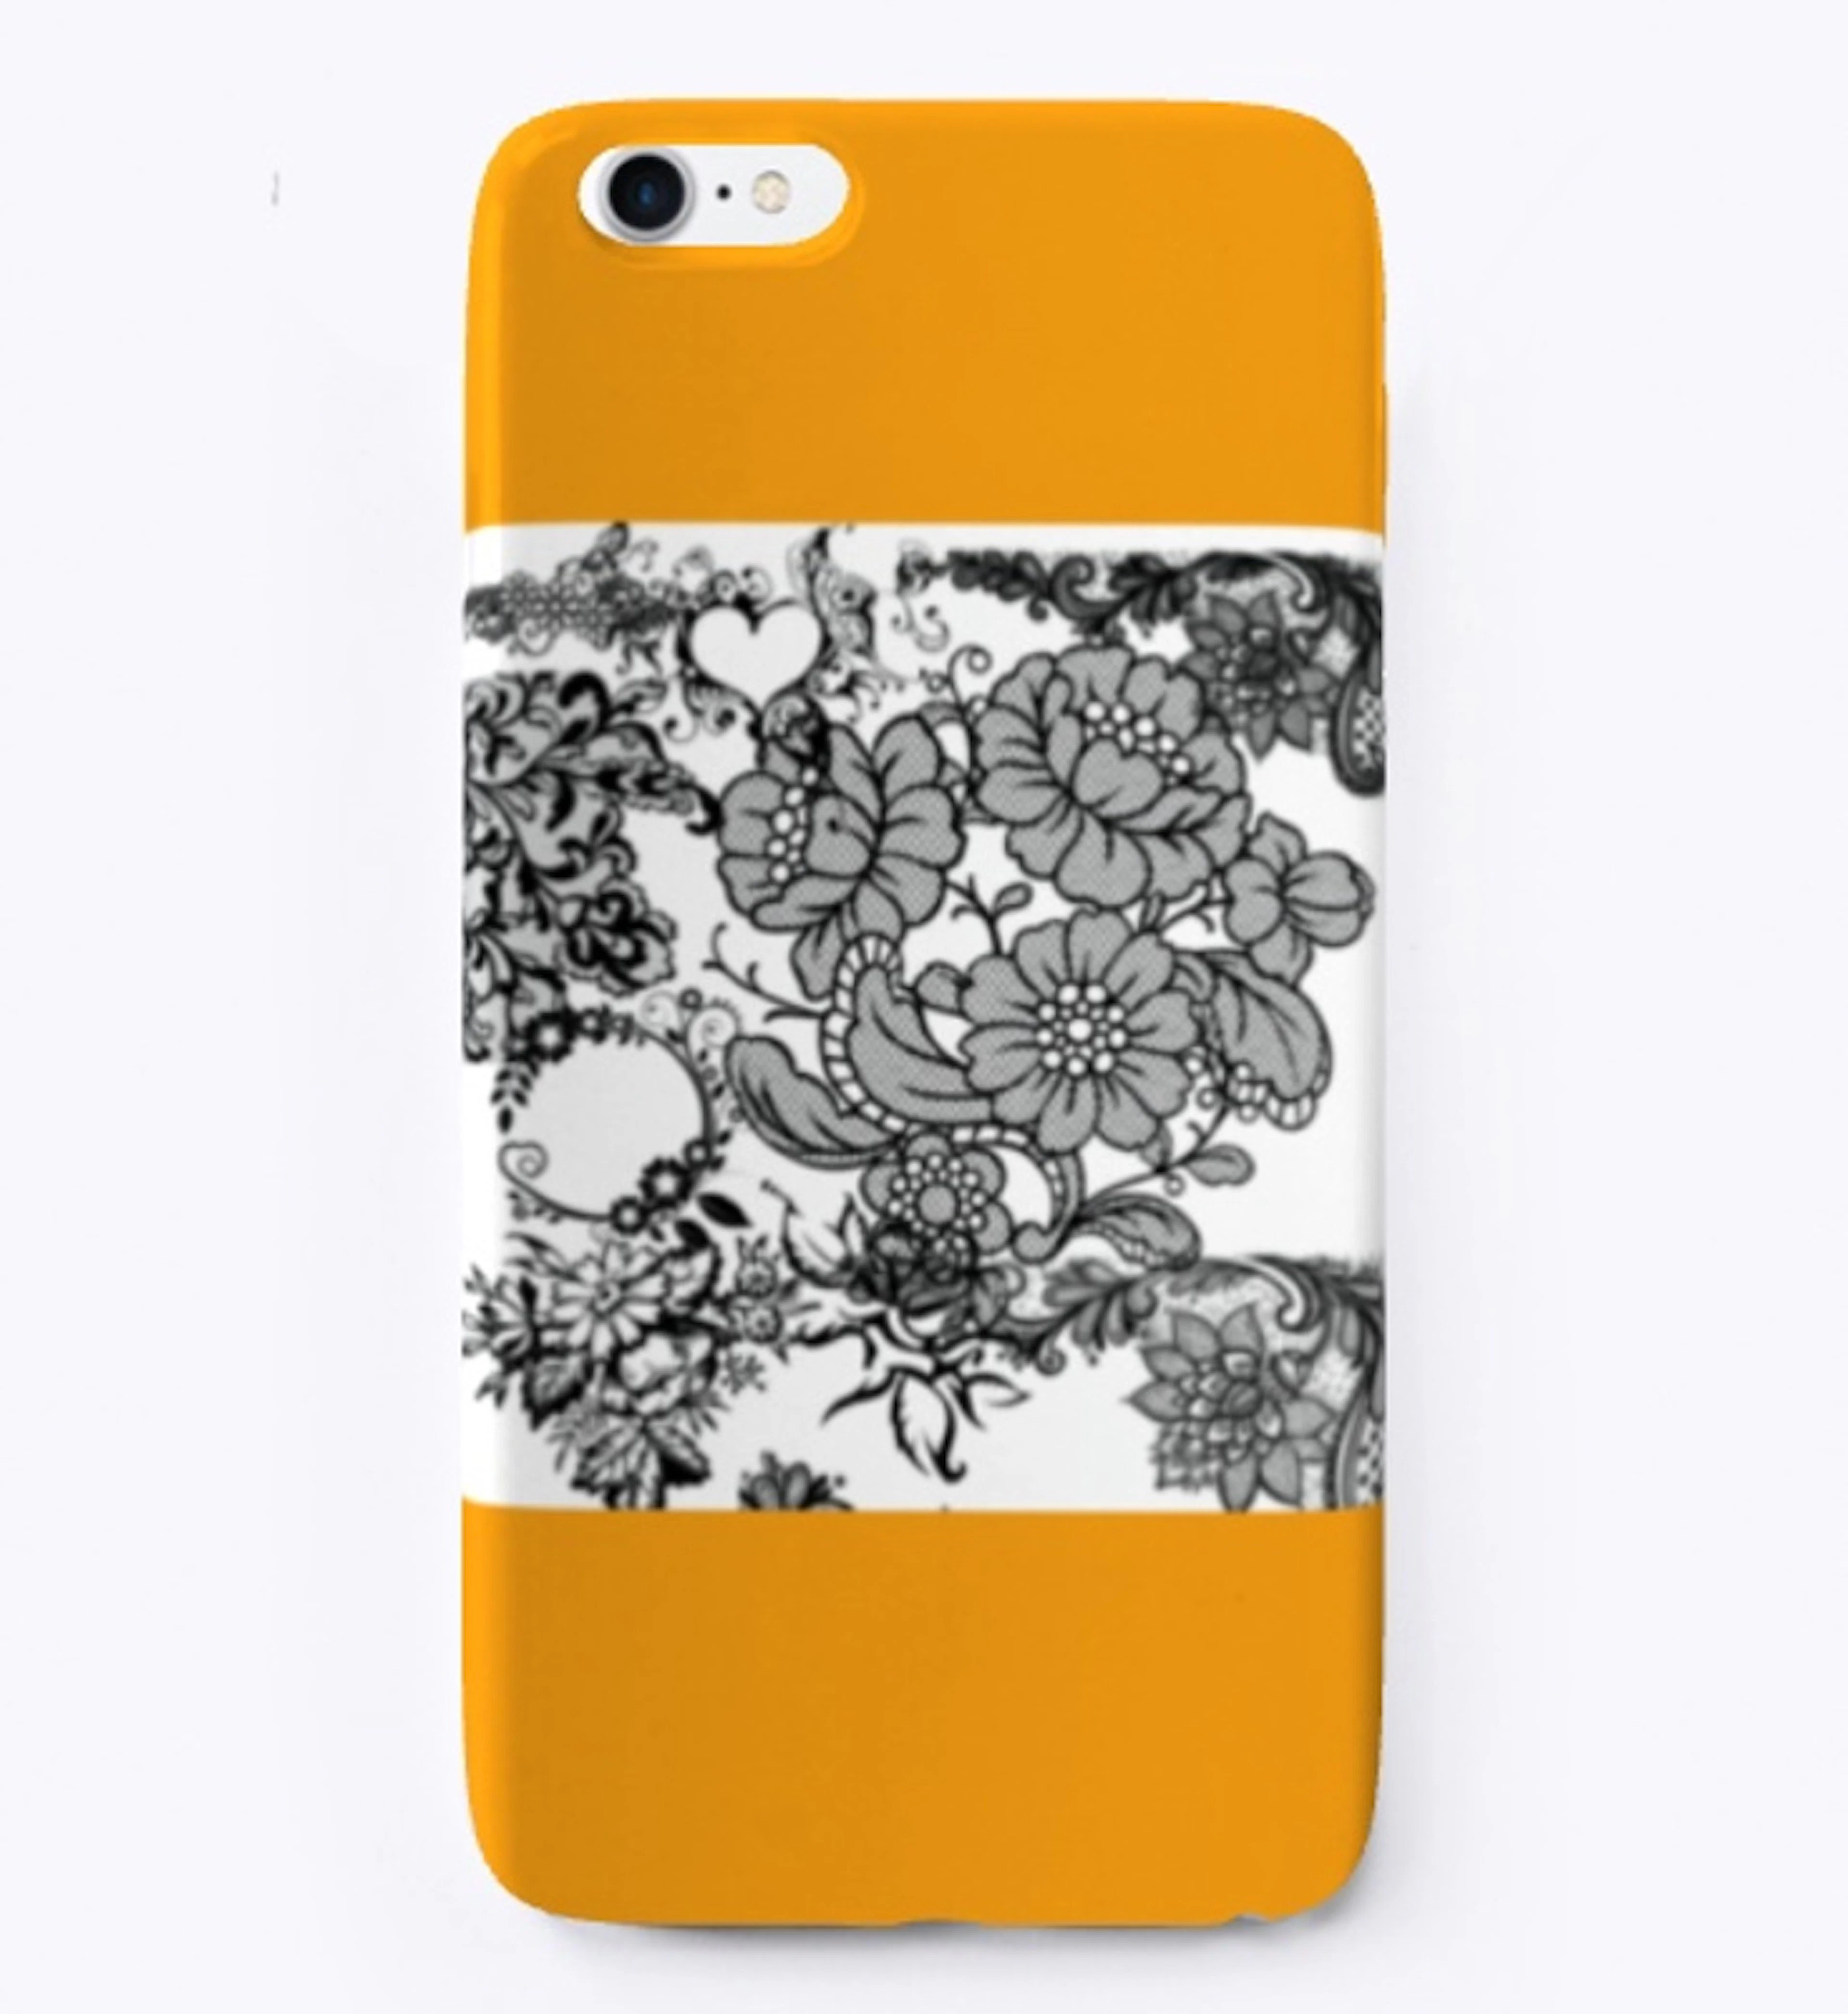 "Variant" Floral iPhone Case